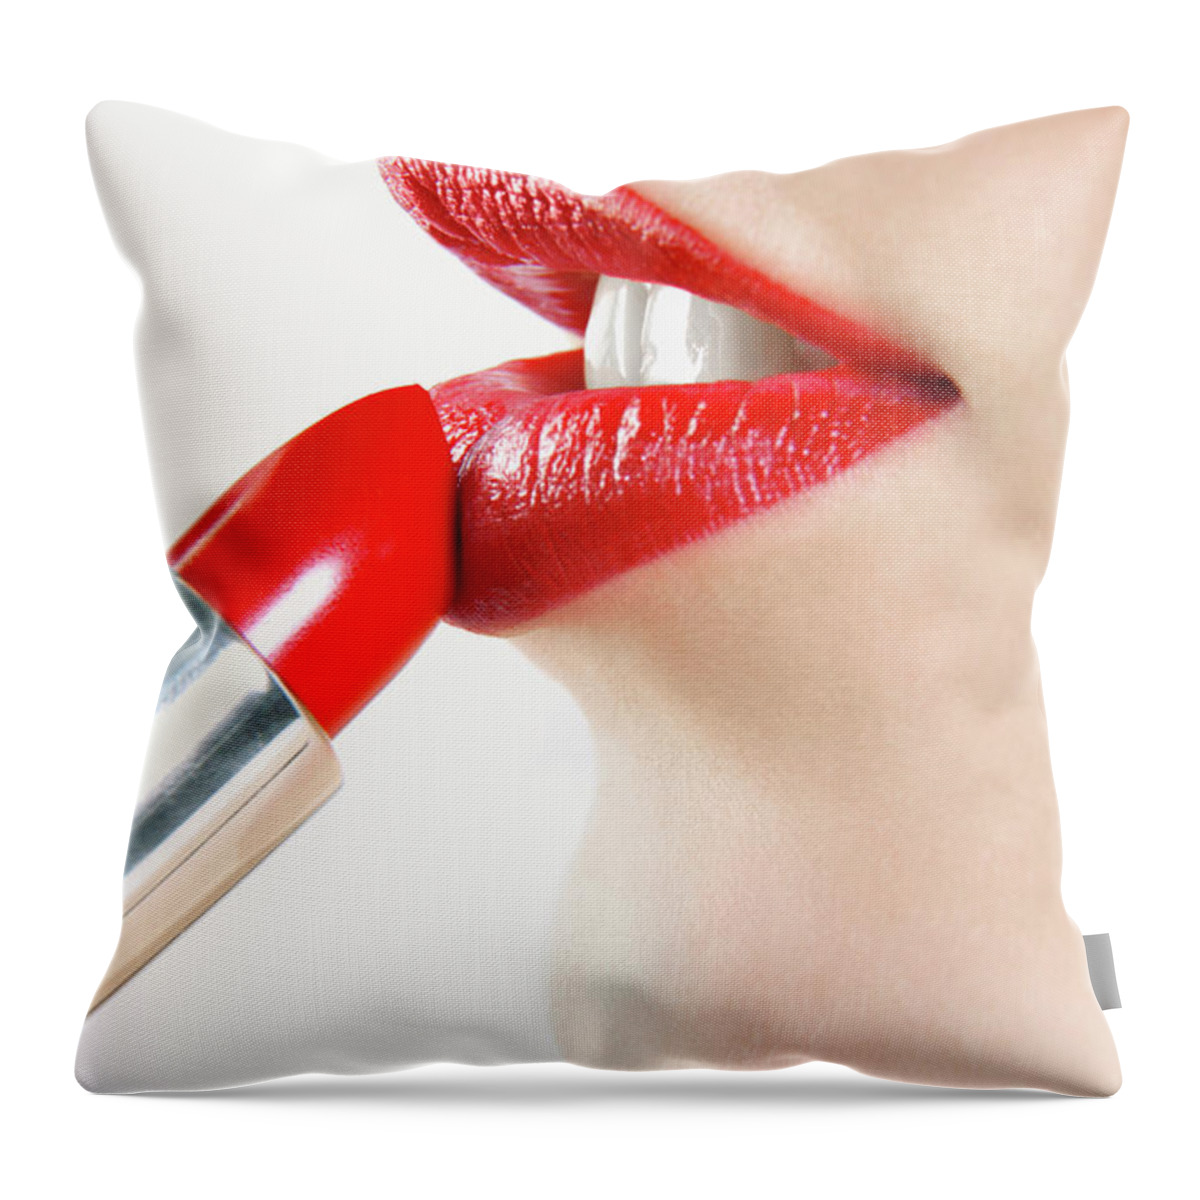 White Background Throw Pillow featuring the photograph Woman Applying Red Lipstick by Digital Vision.